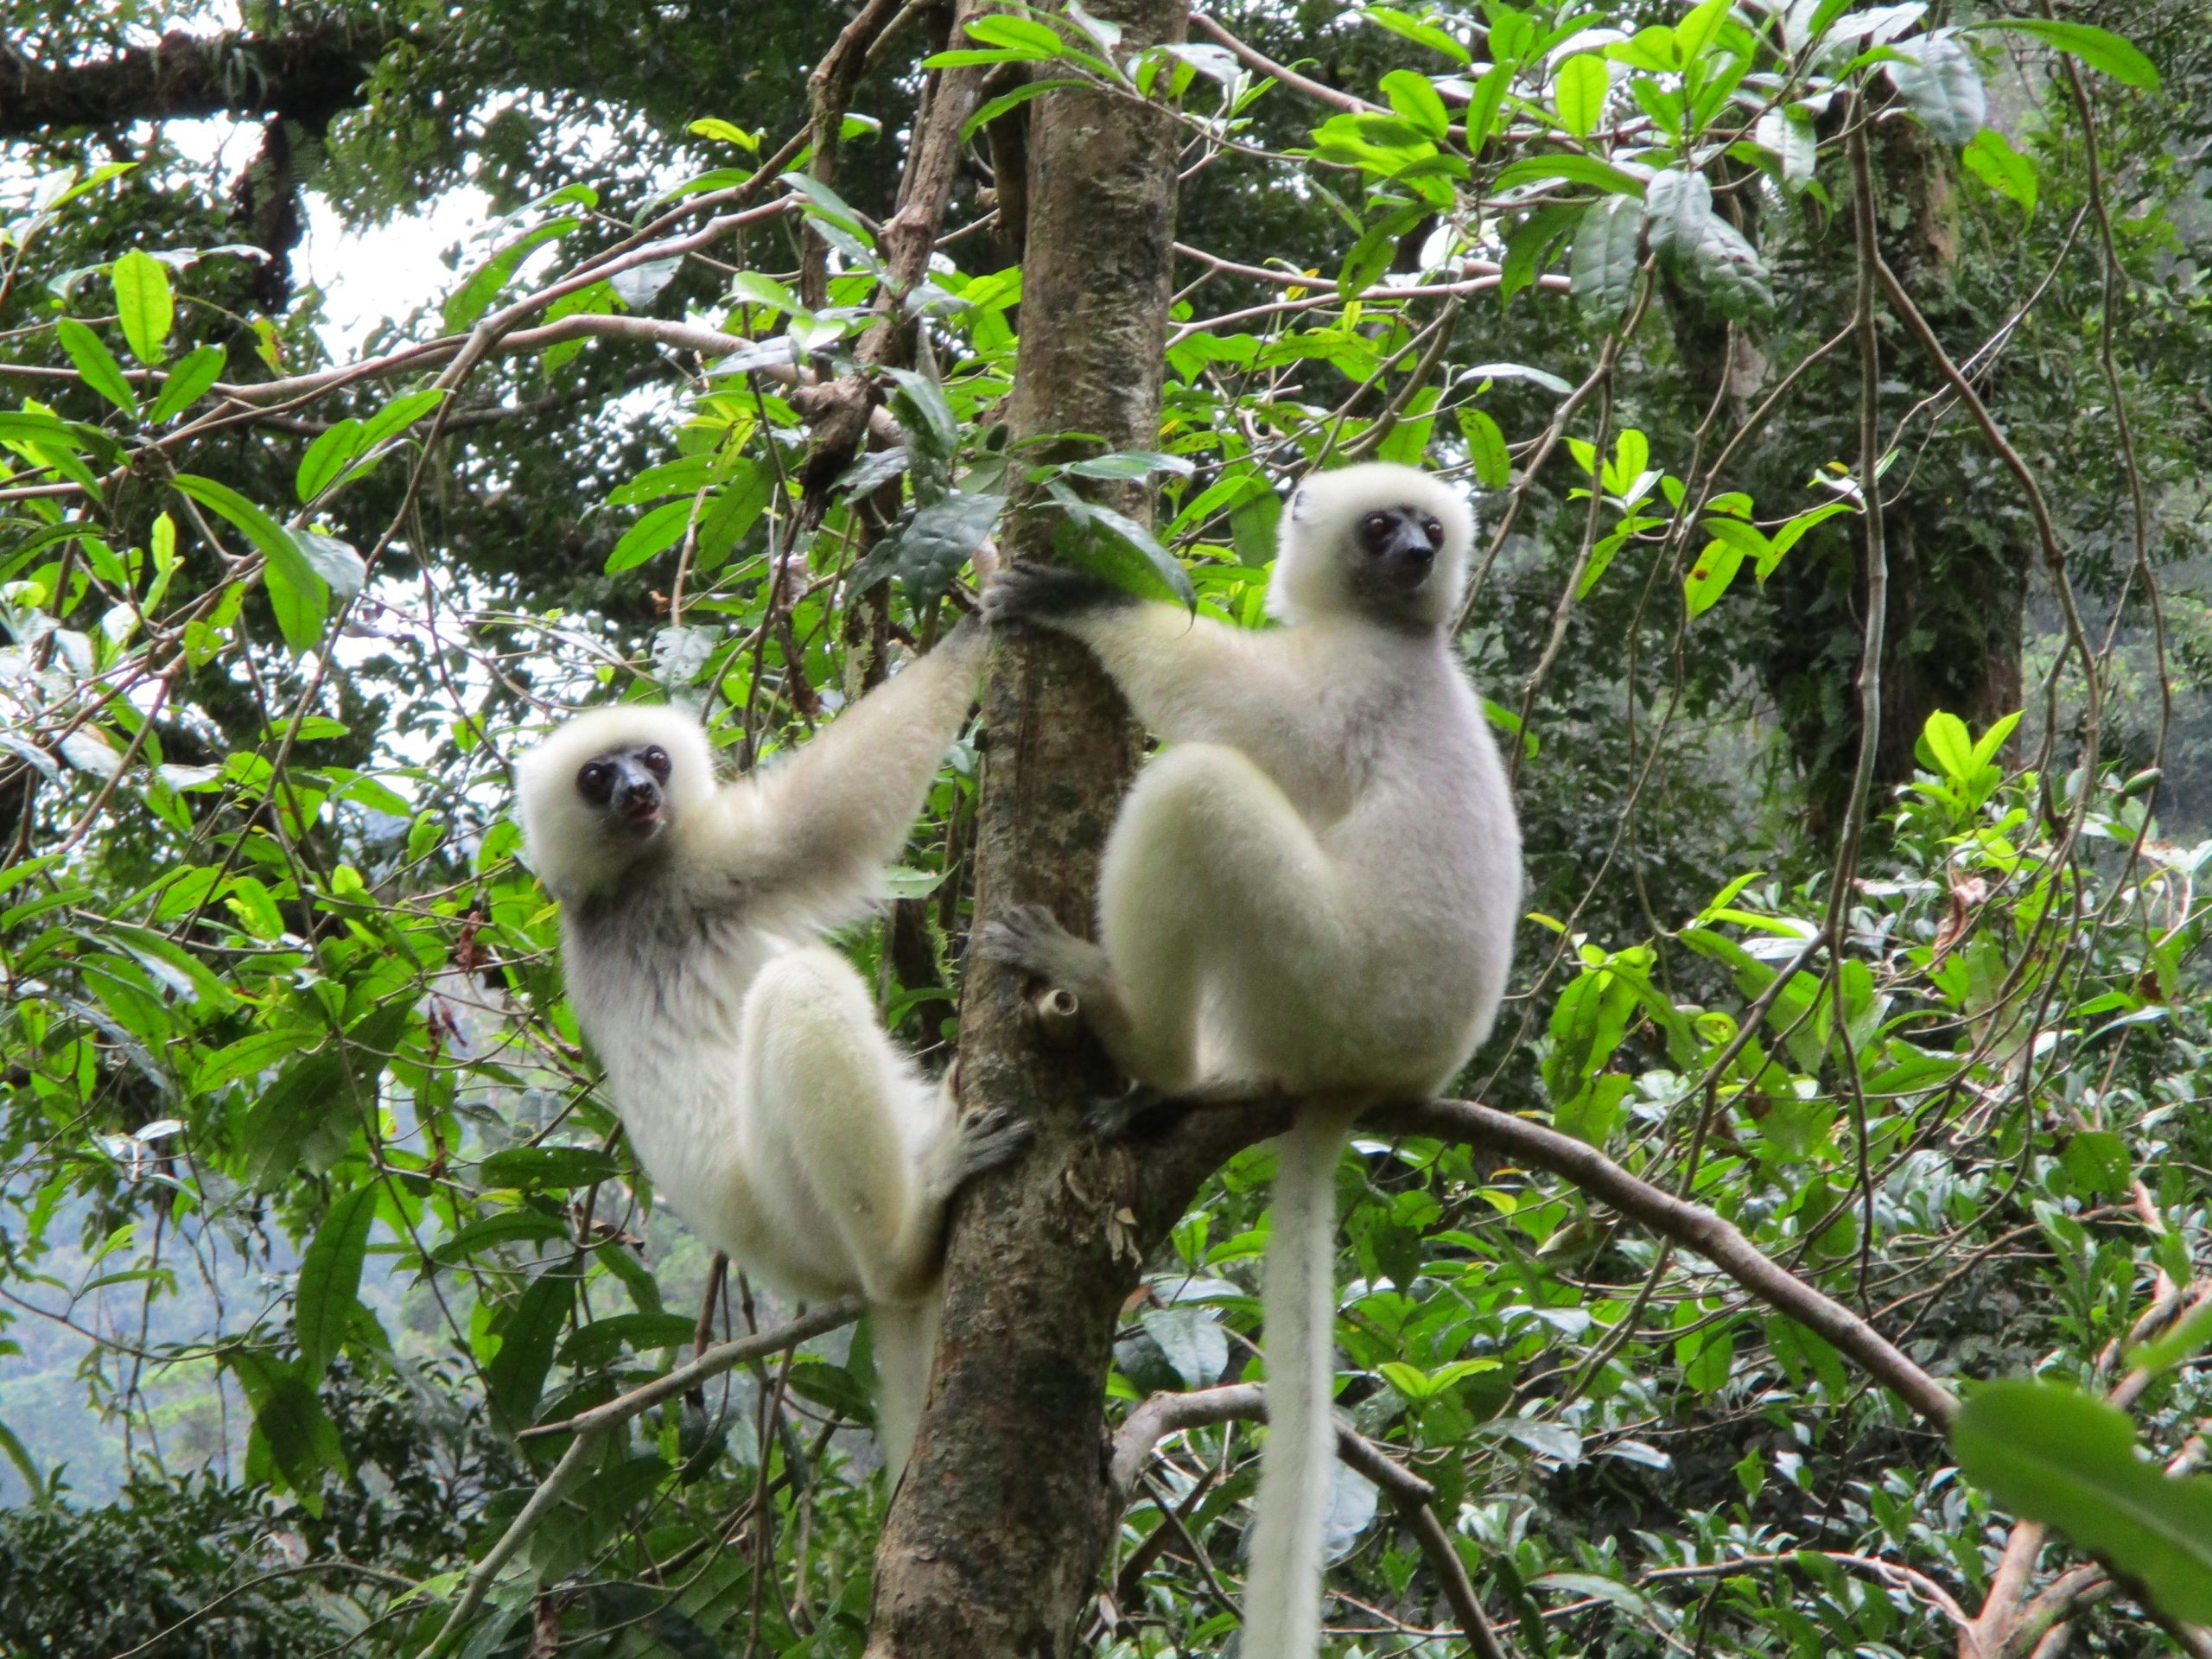 Two Silky Sifaka lemurs in a tree